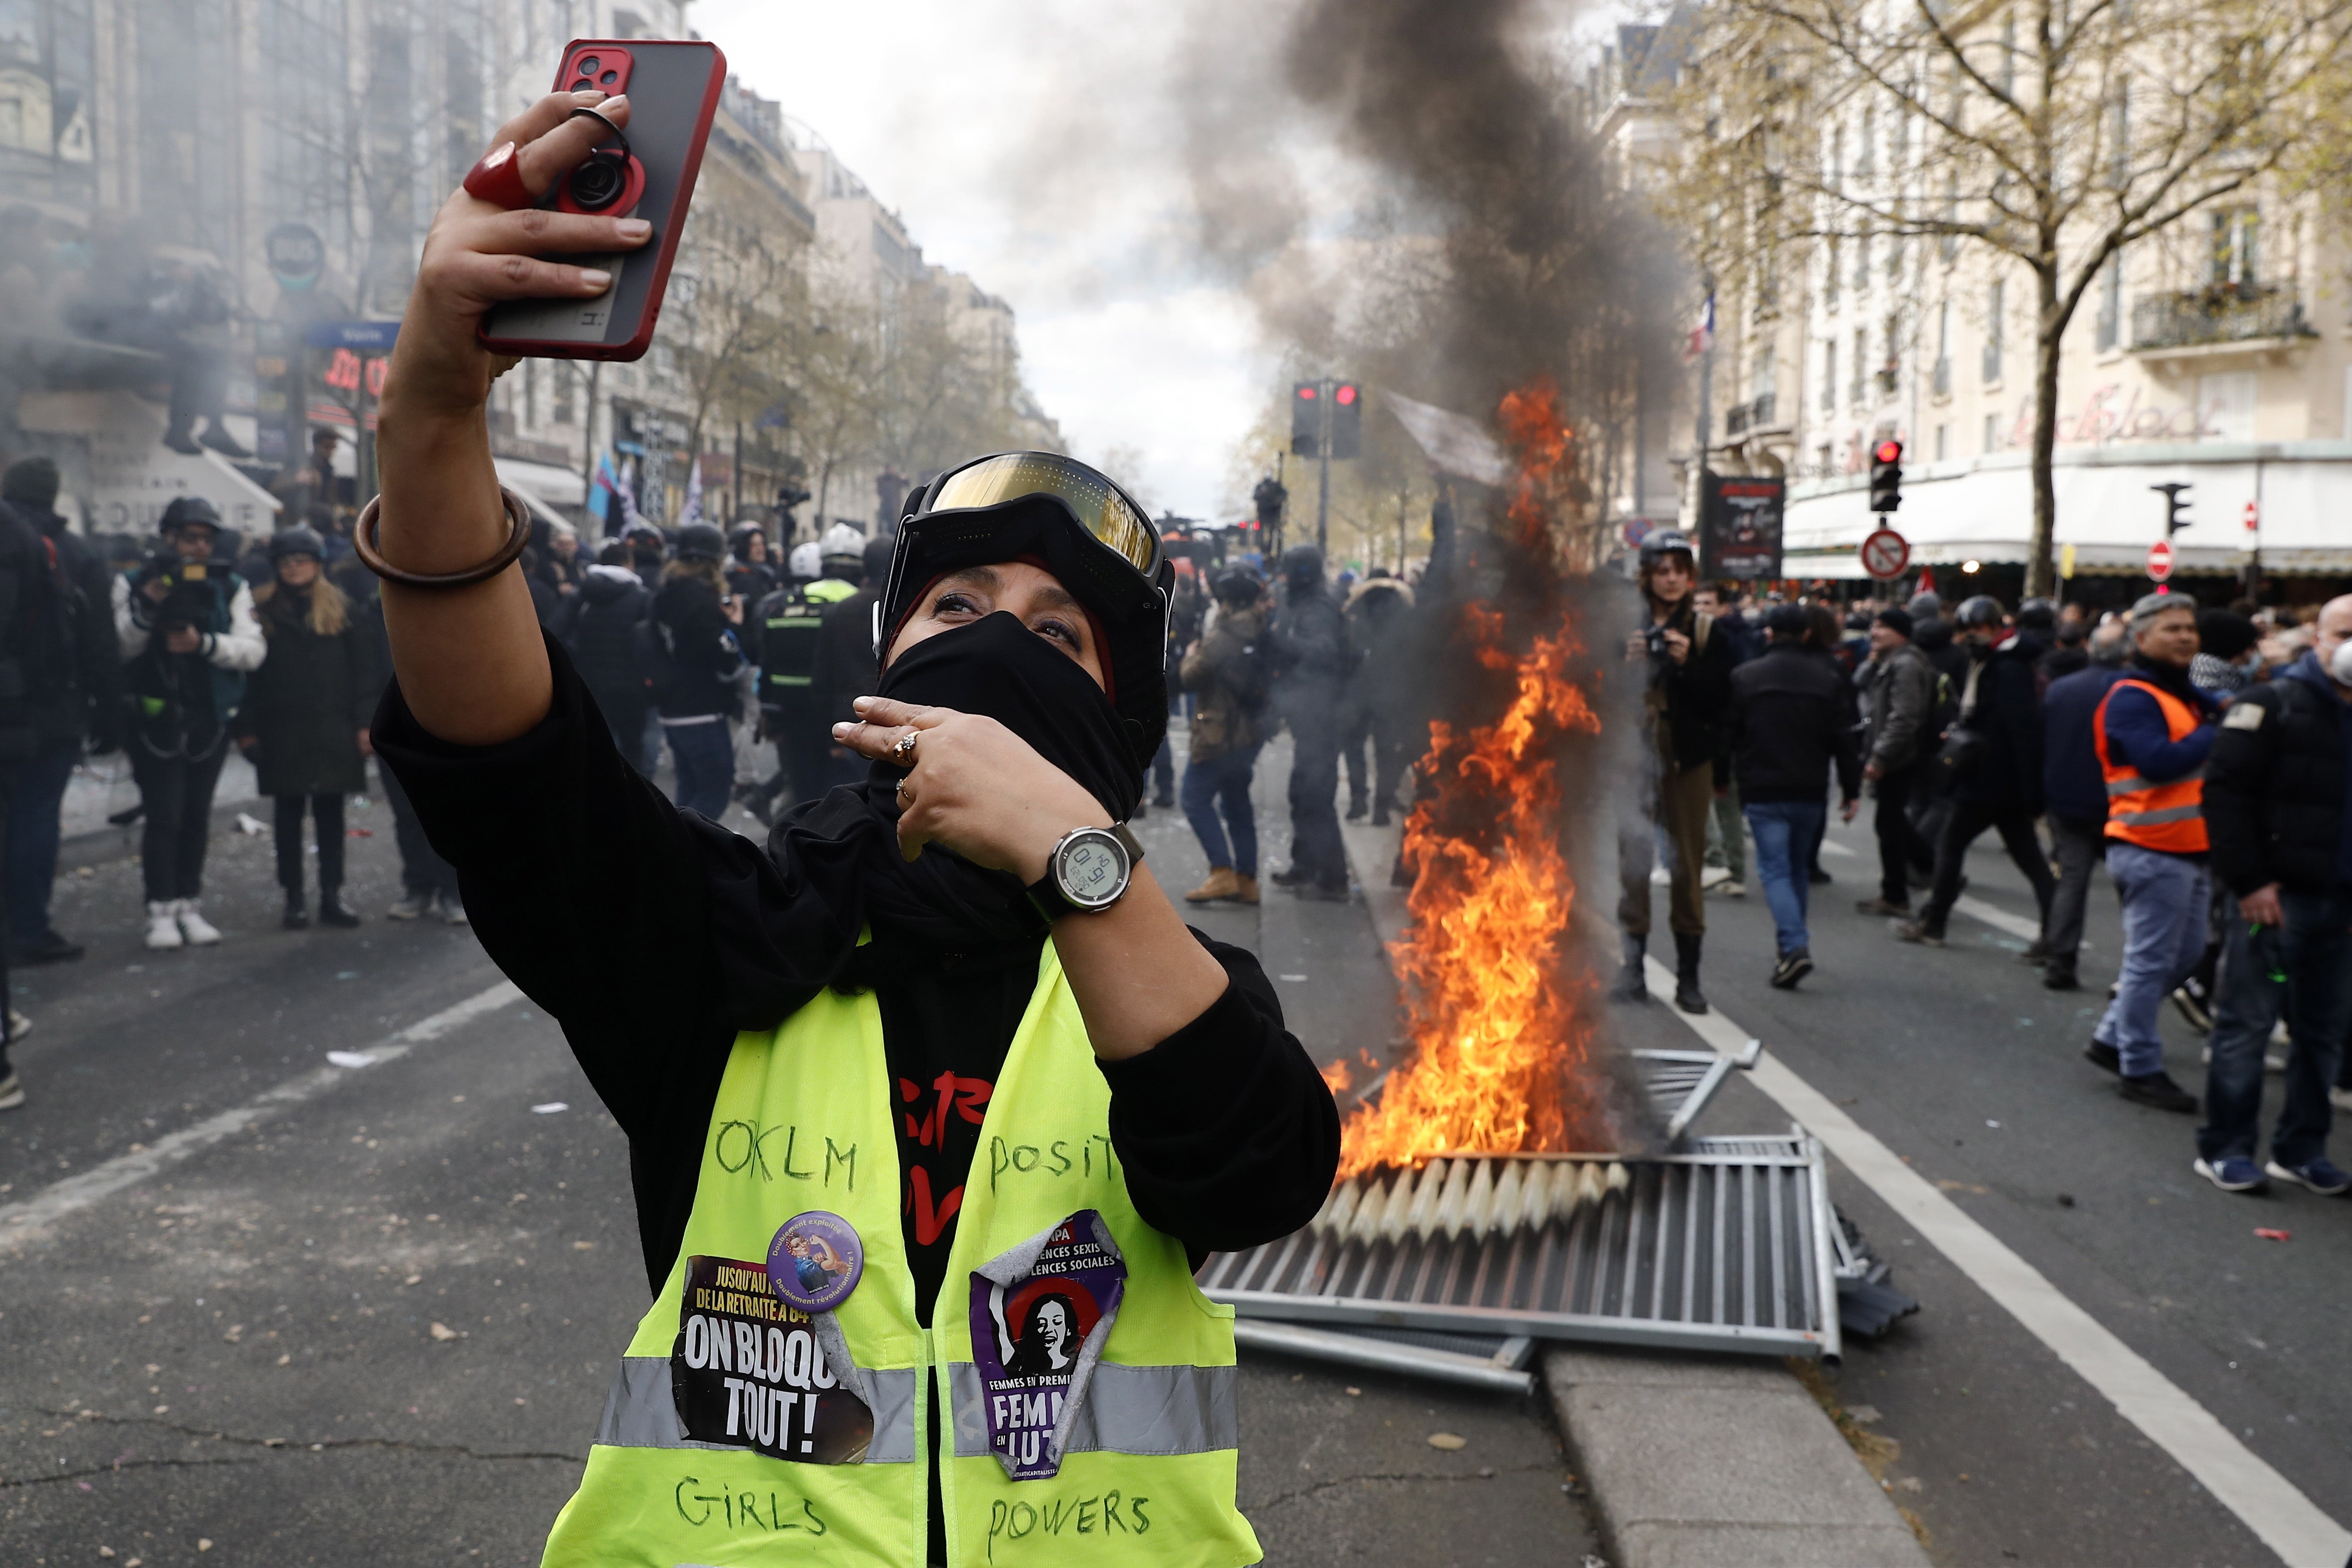 A protester in Paris on Thursday